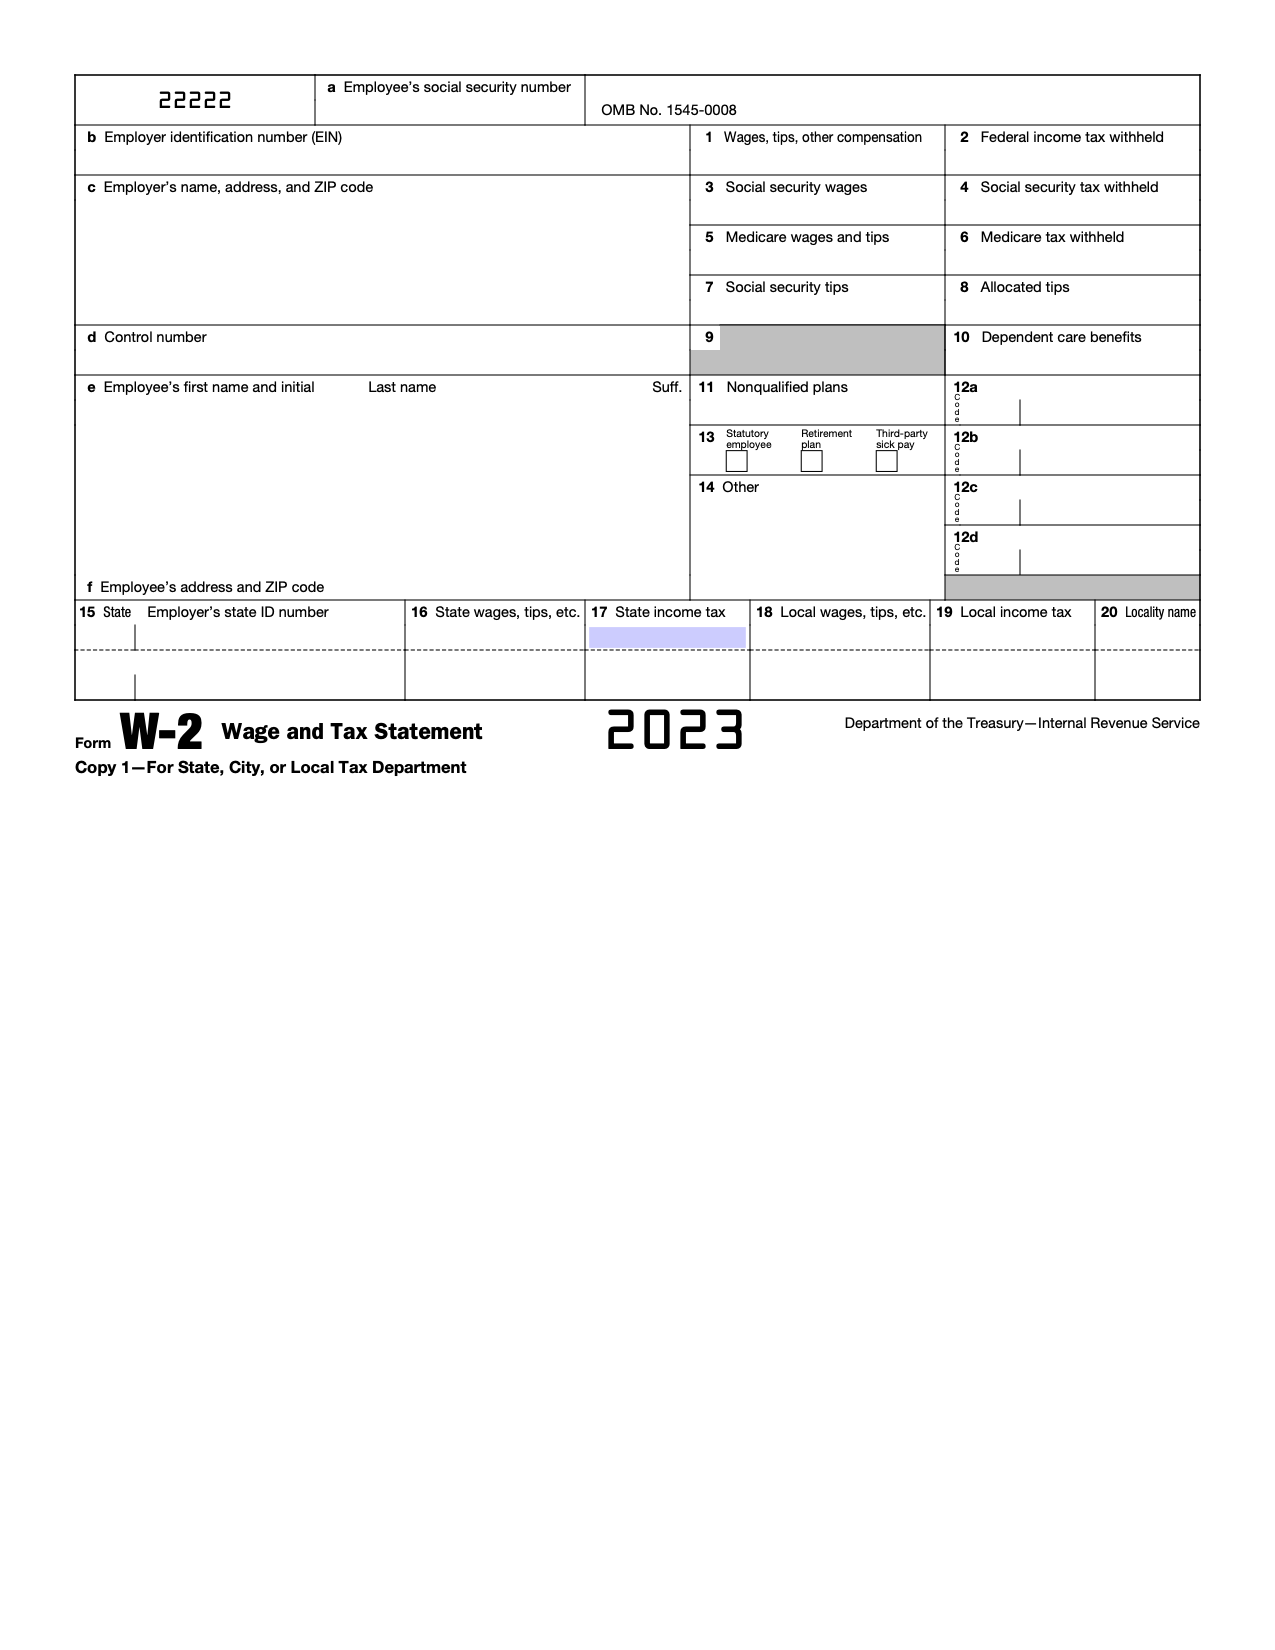 Free Irs Form W-2 | Wage And Tax Statement - Pdf – Eforms inside W2 Forms Download